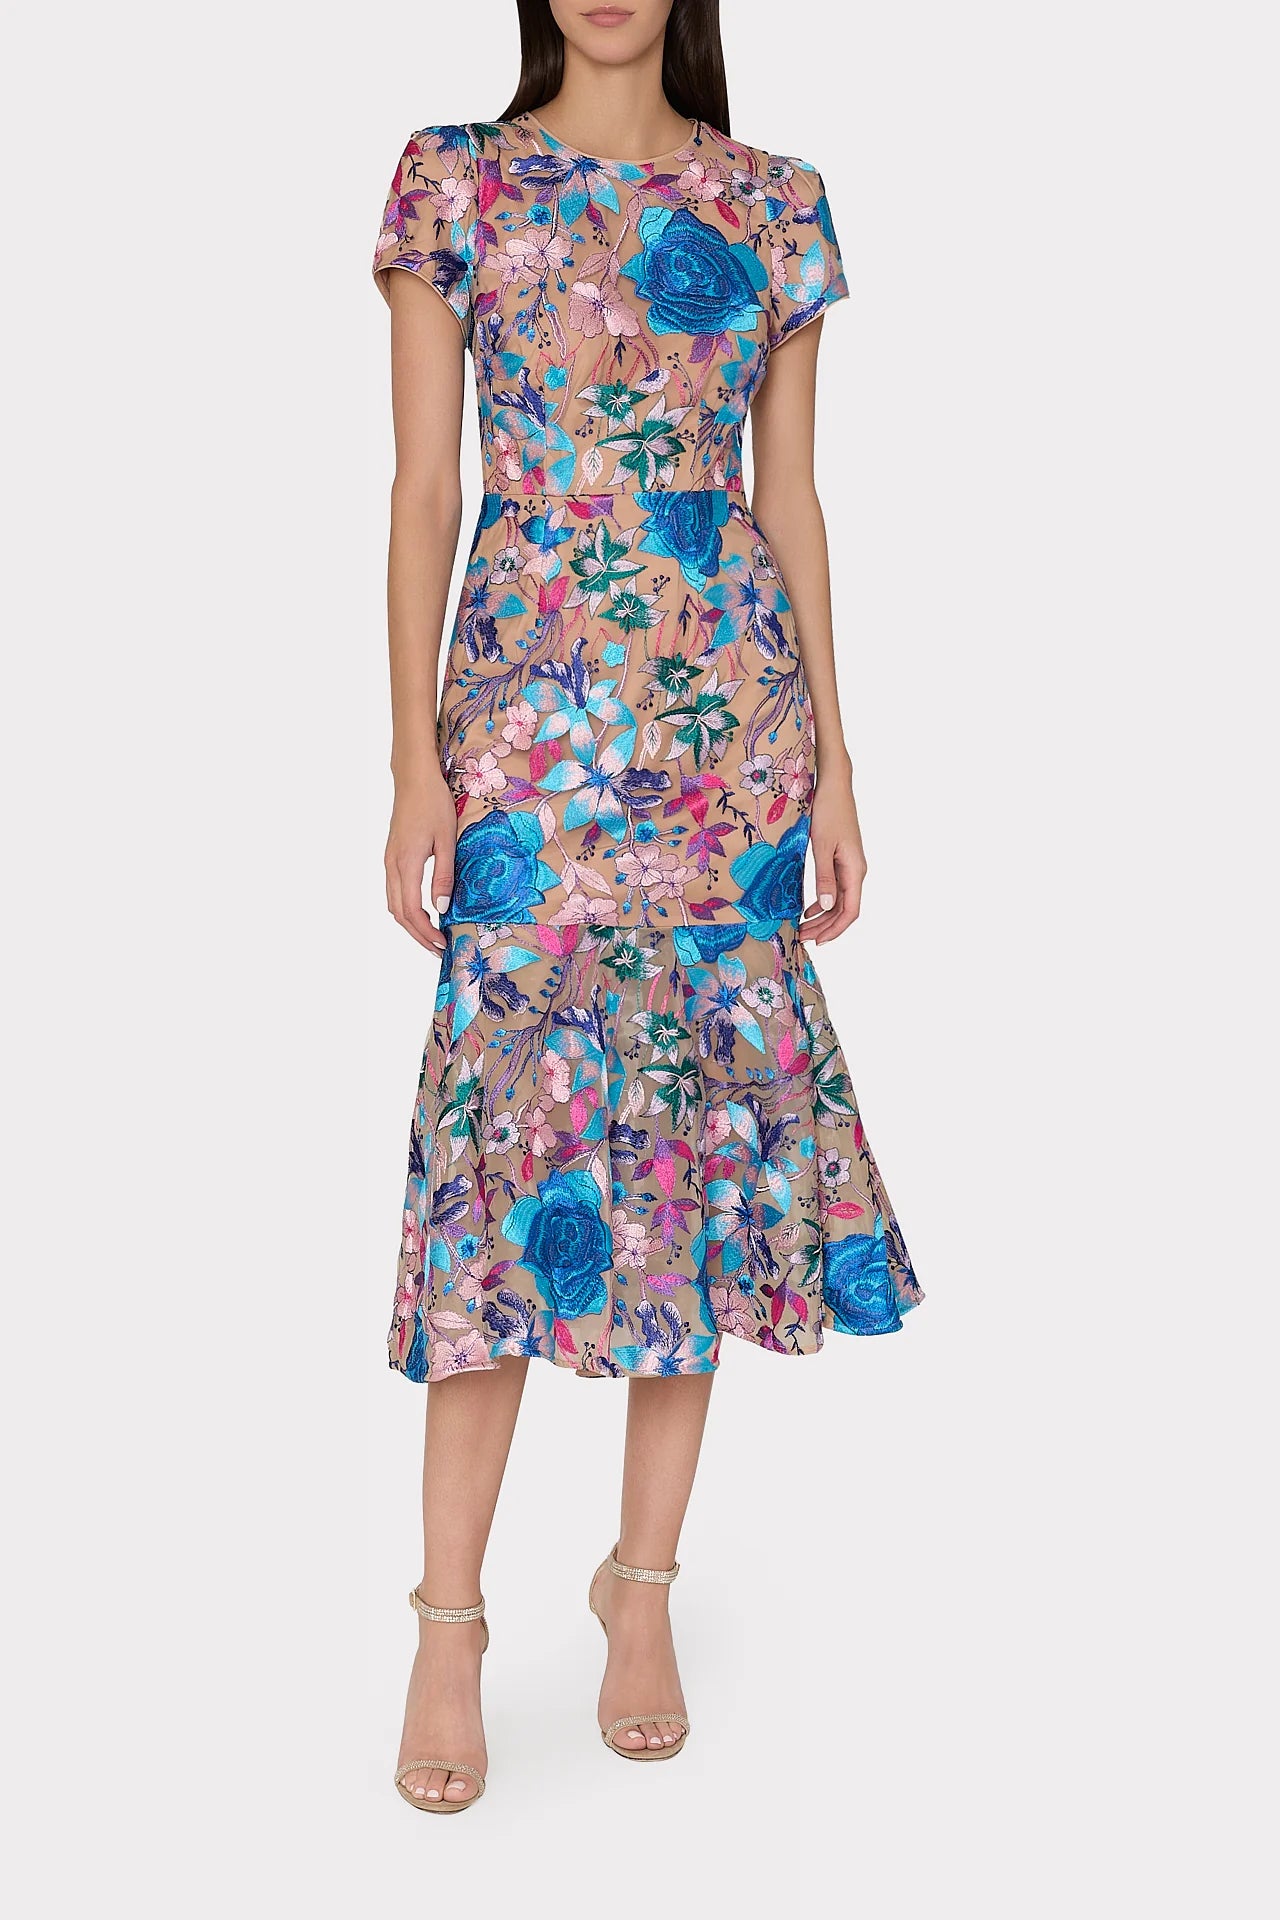 Tahlia Fall Floral Embroidered Dress